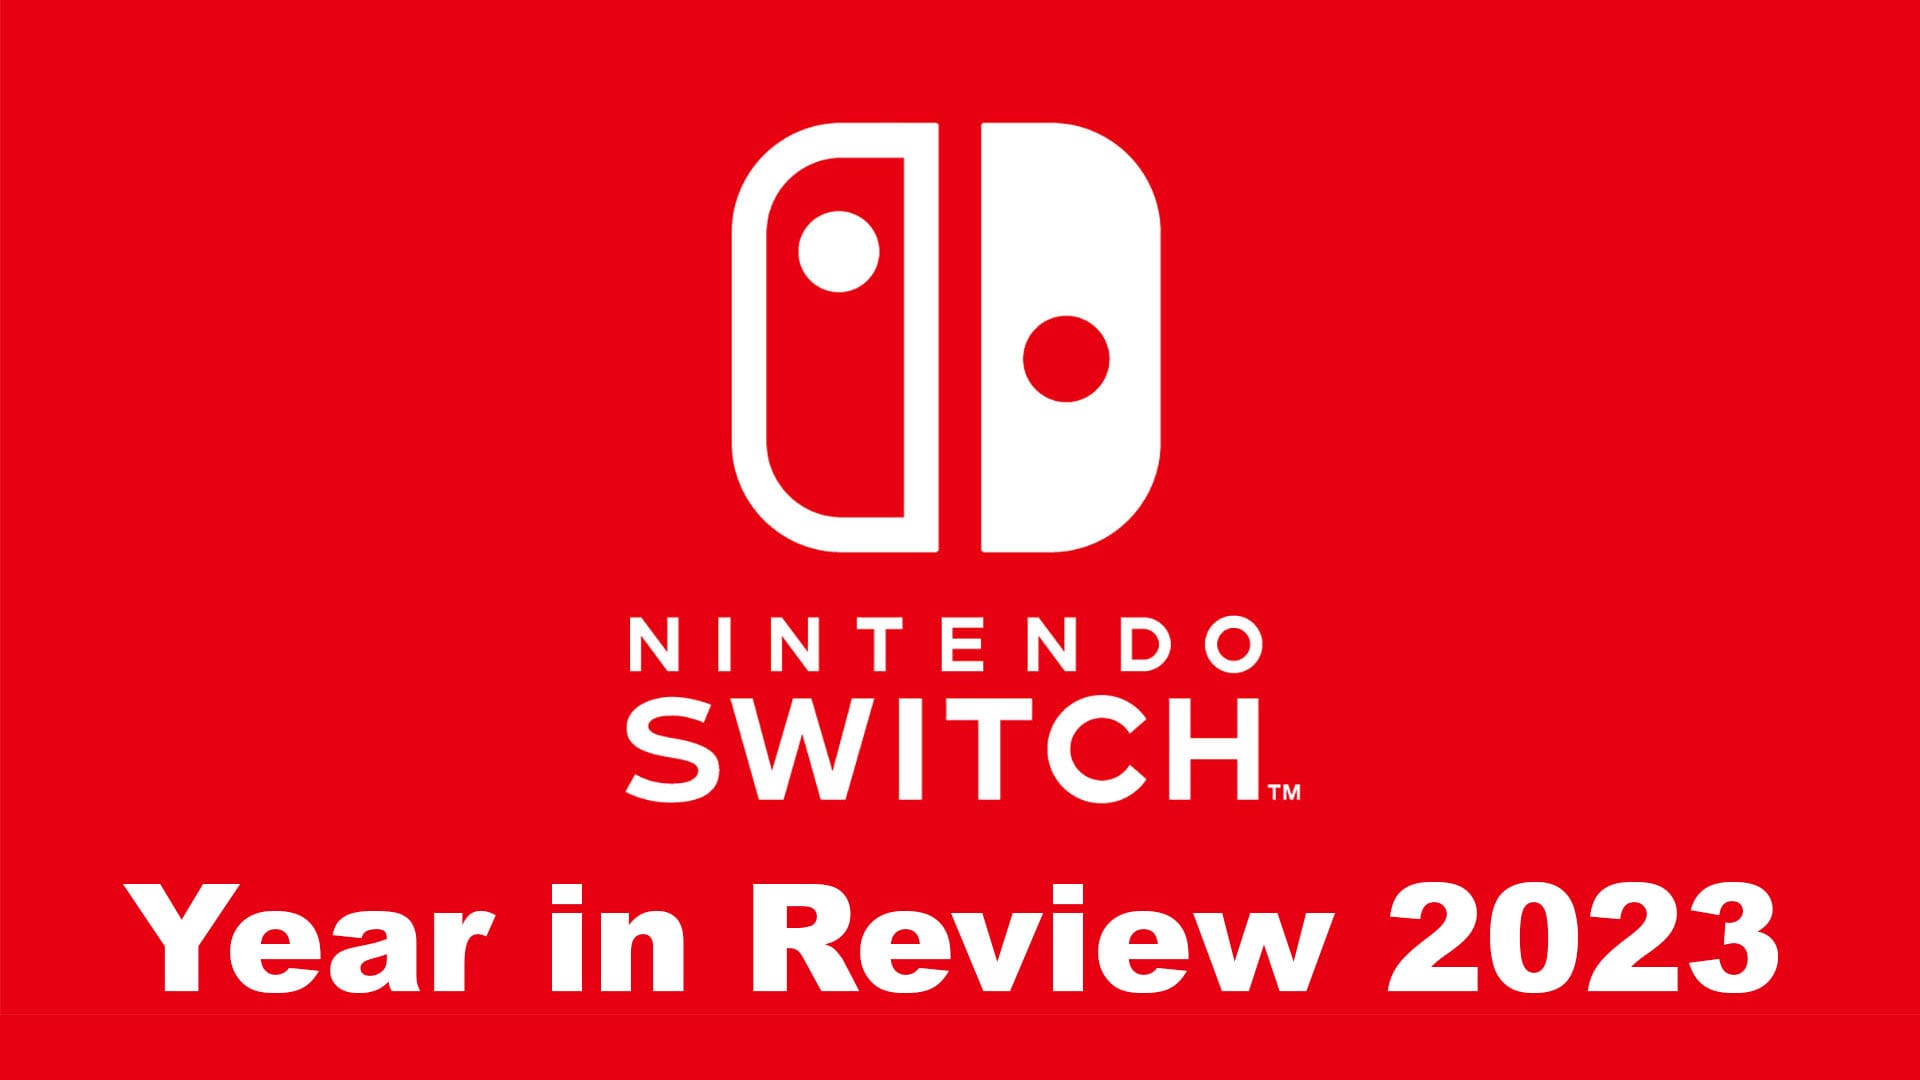 Nintendo Swtch Year in Review 2023 Available Now